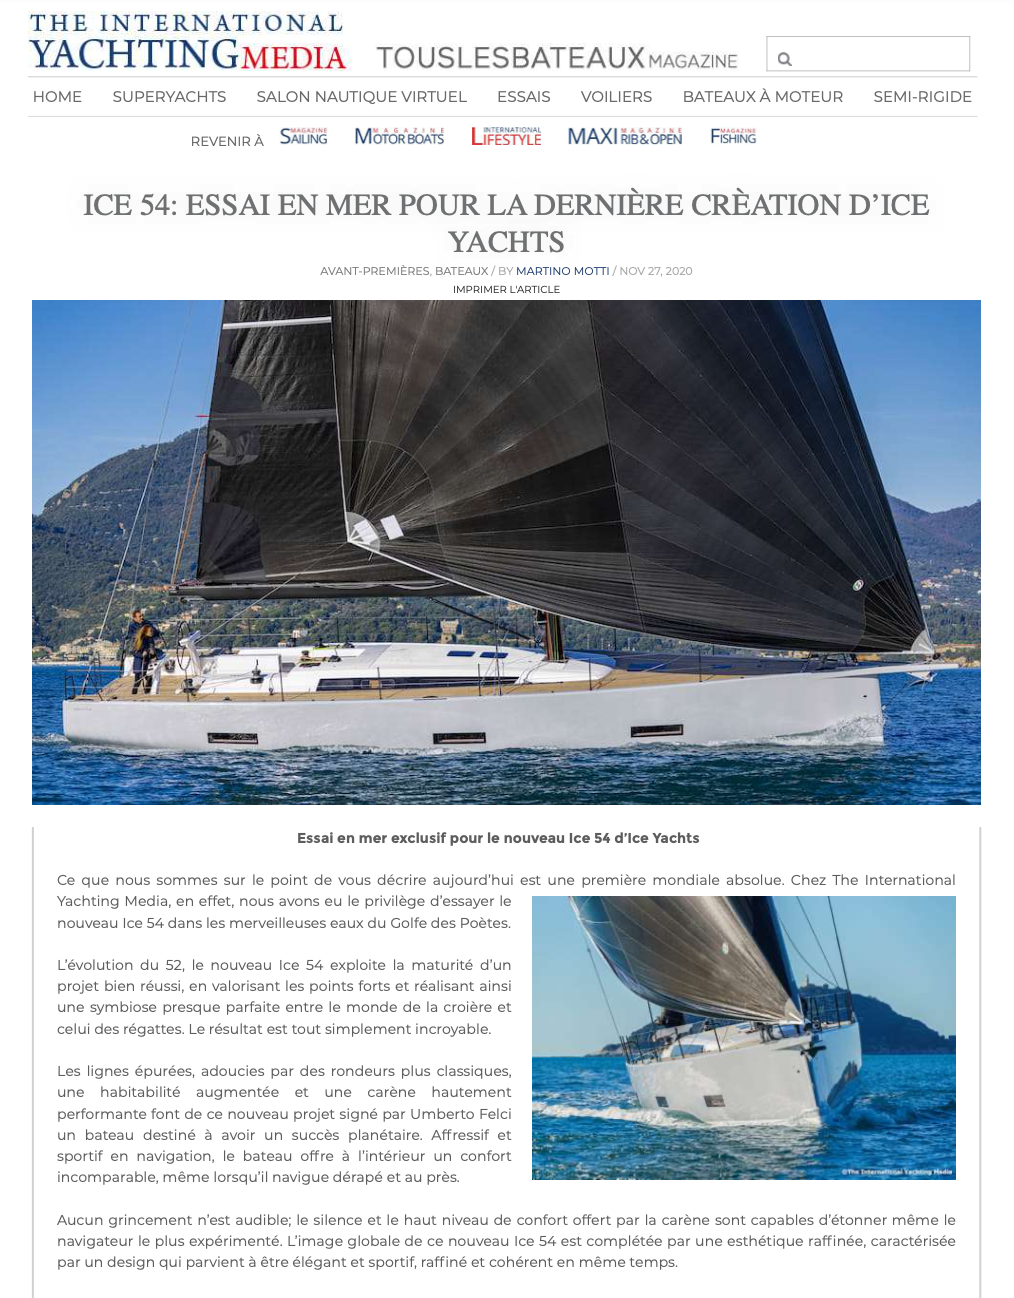 ICE 54 - Sea Trial